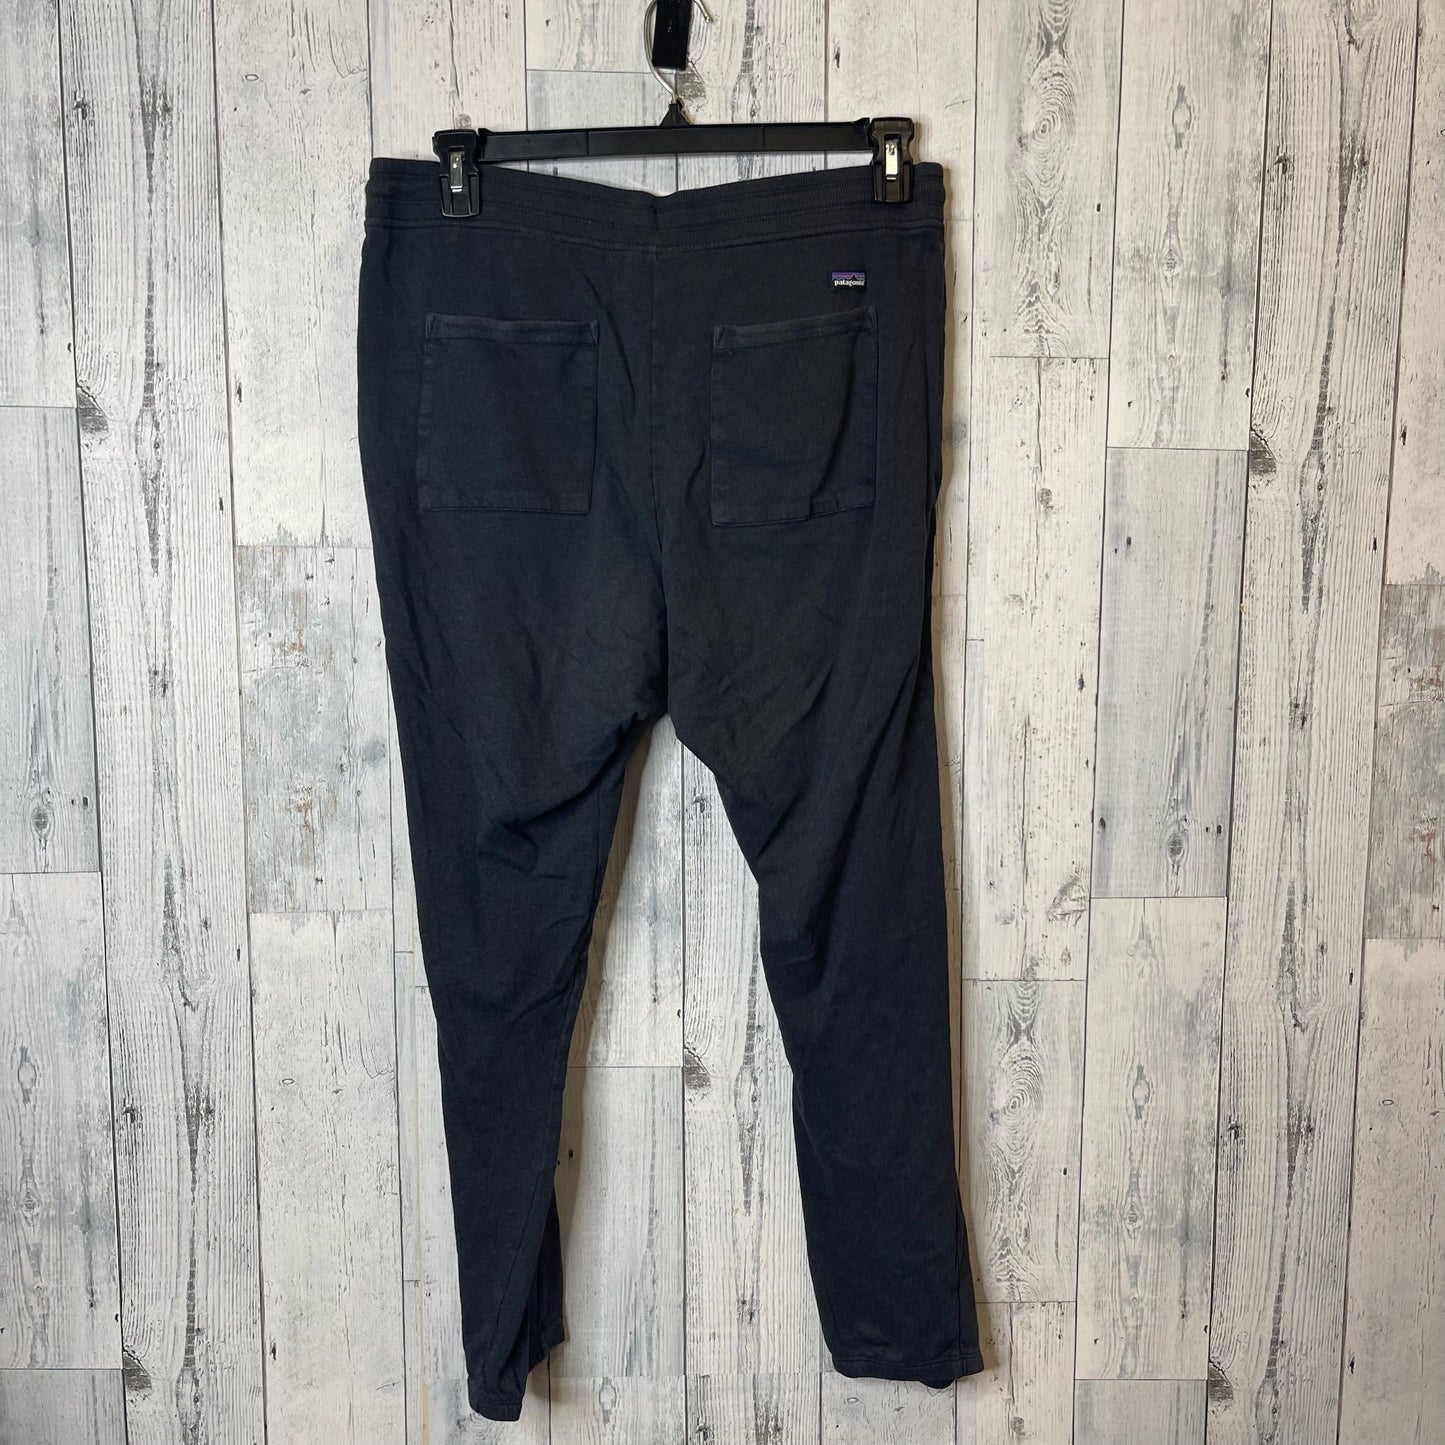 Athletic Pants By Patagonia  Size: L